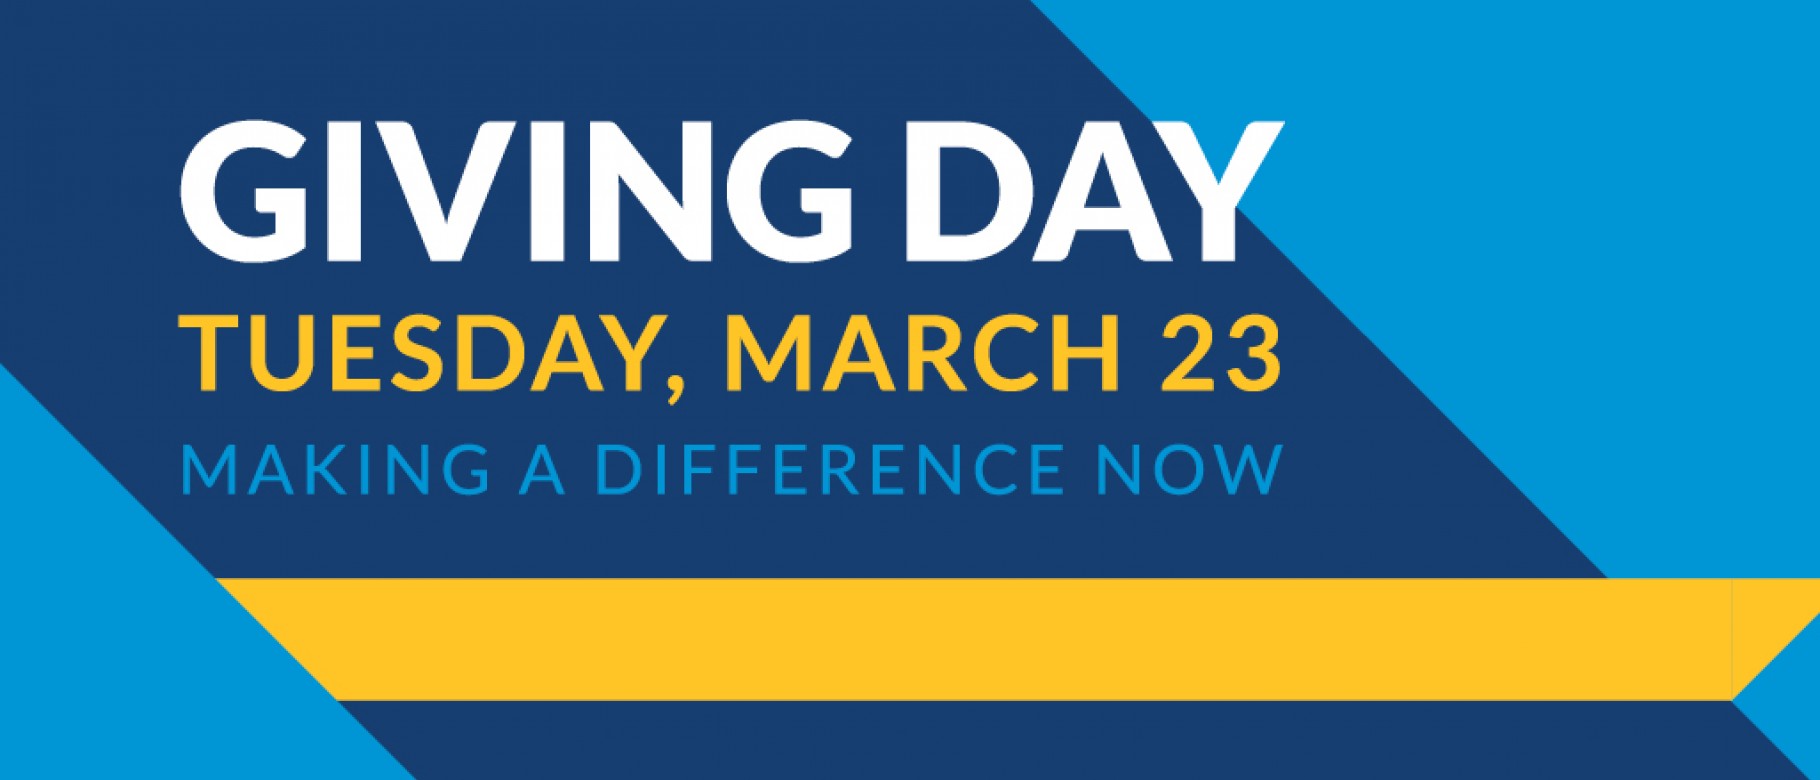 Graphic for U N E's annual giving day Tuesday March, 23, 2021